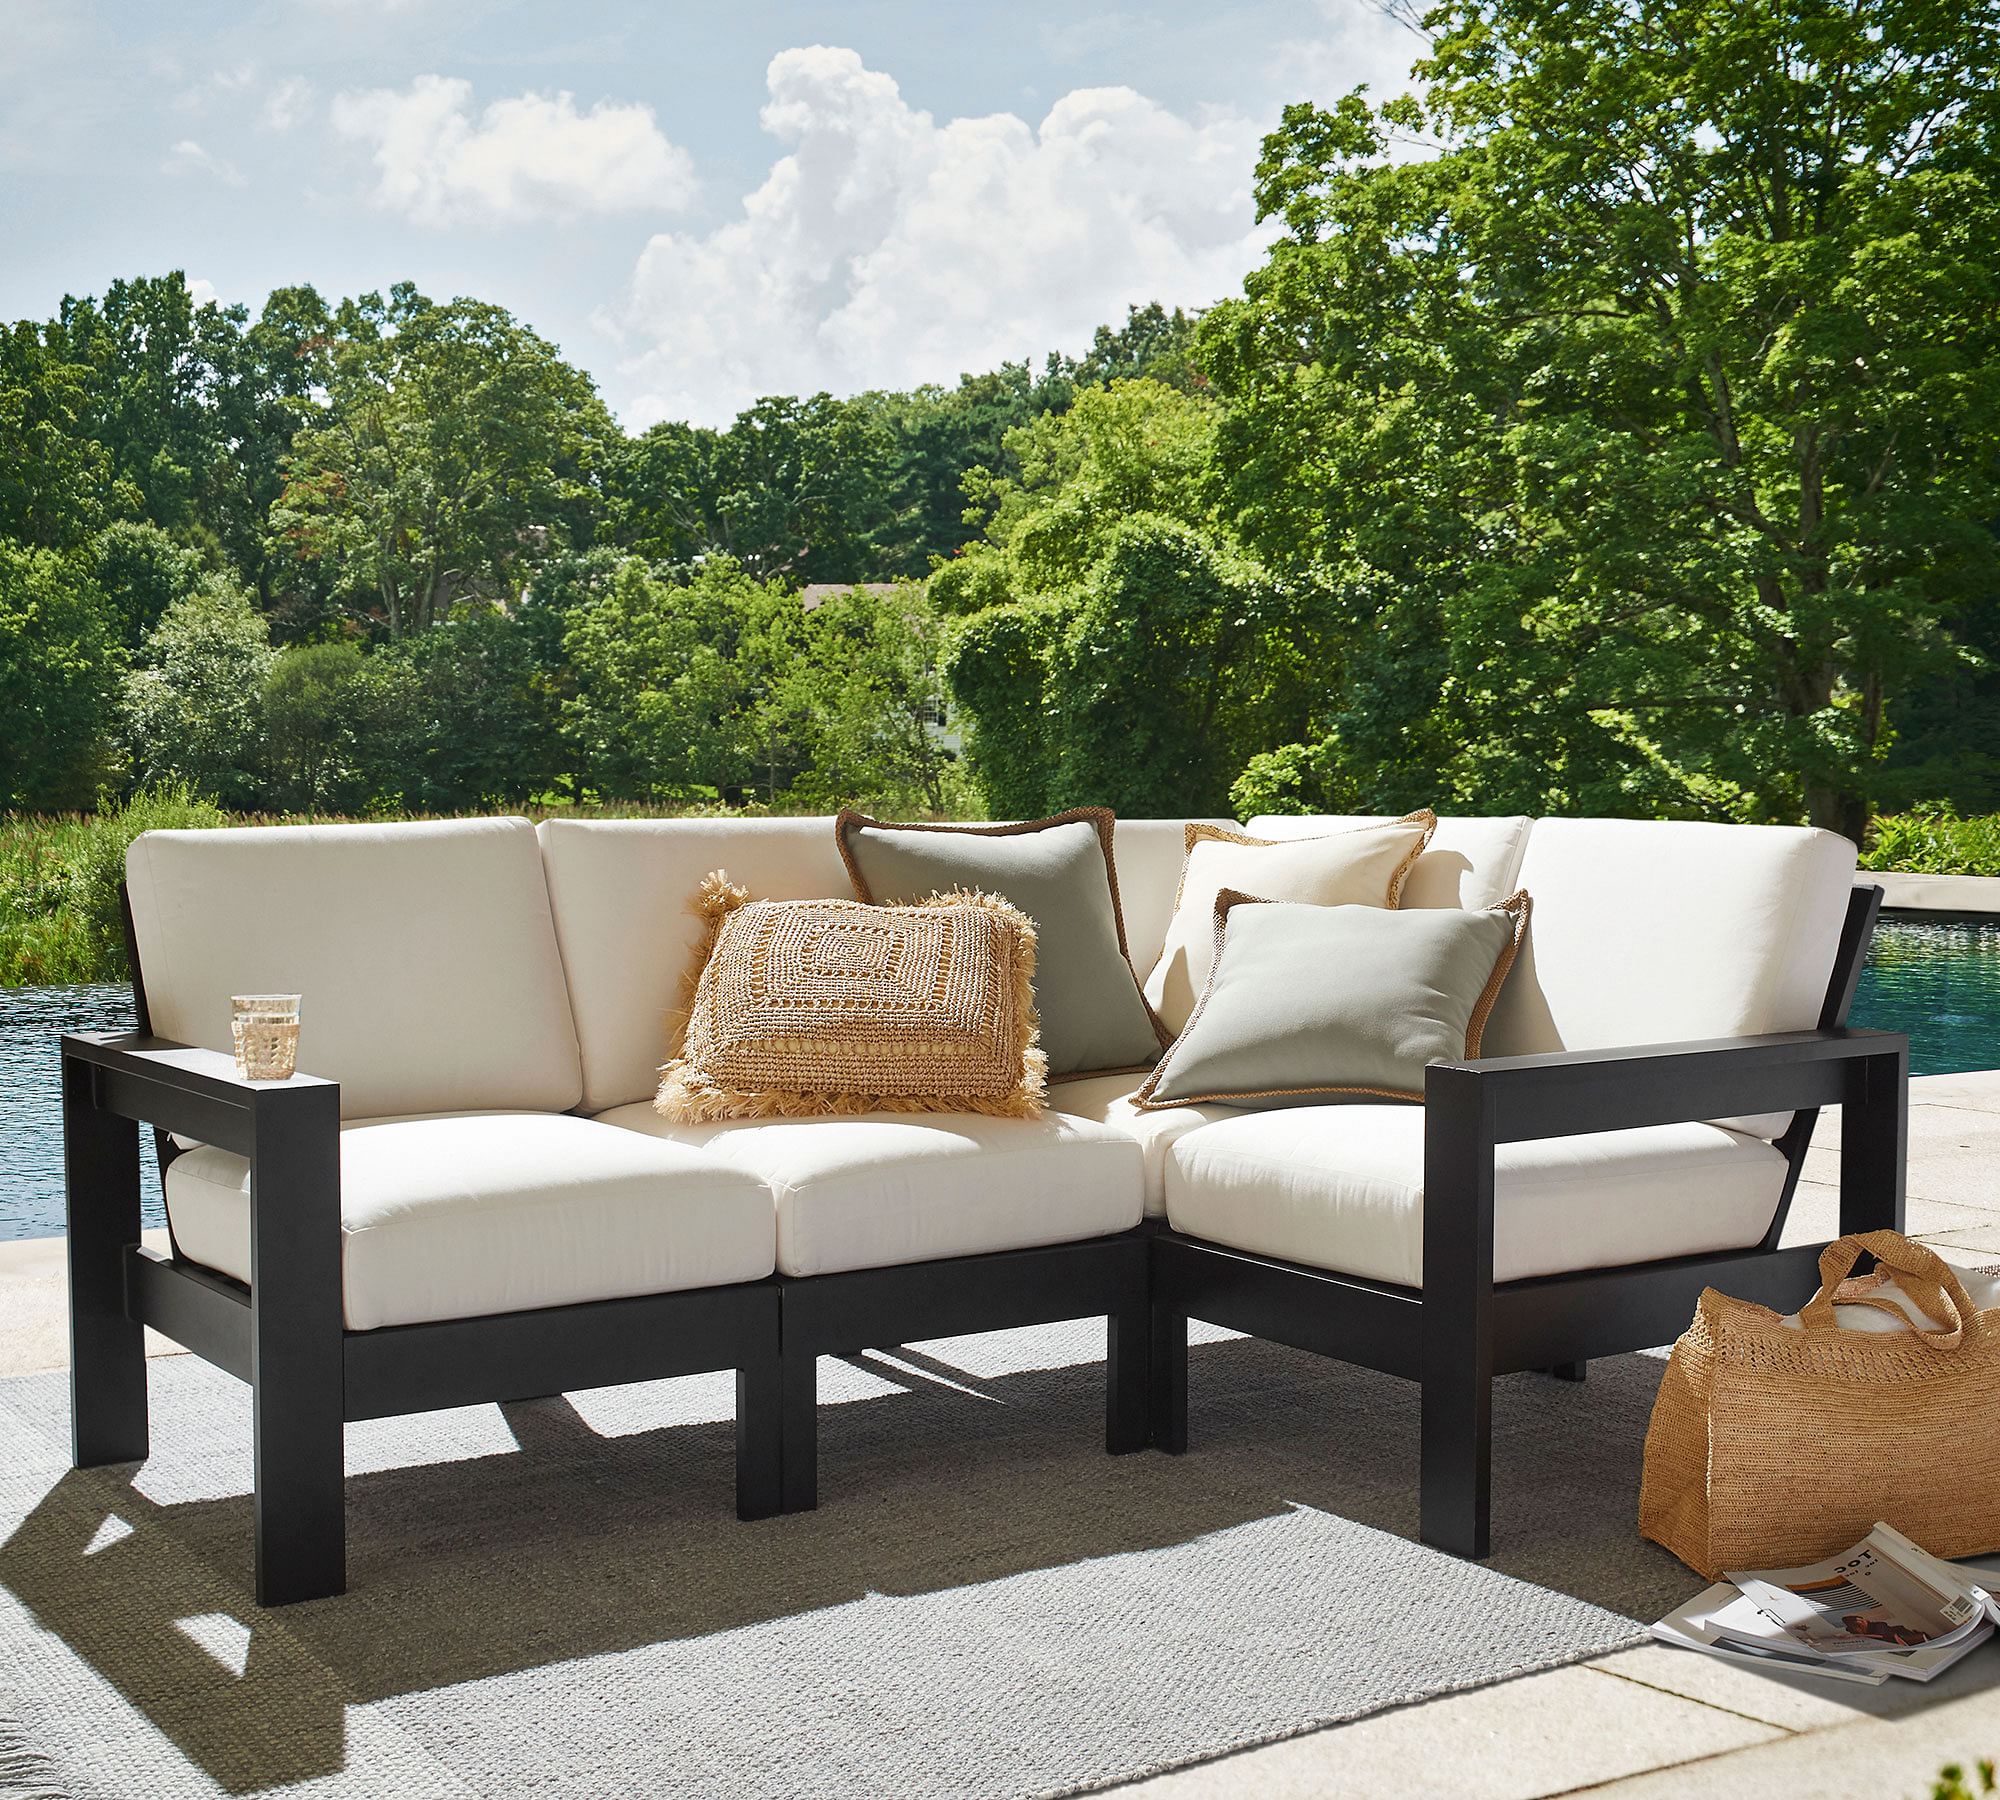 Build Your Own - Malibu Metal Outdoor Sectional Components